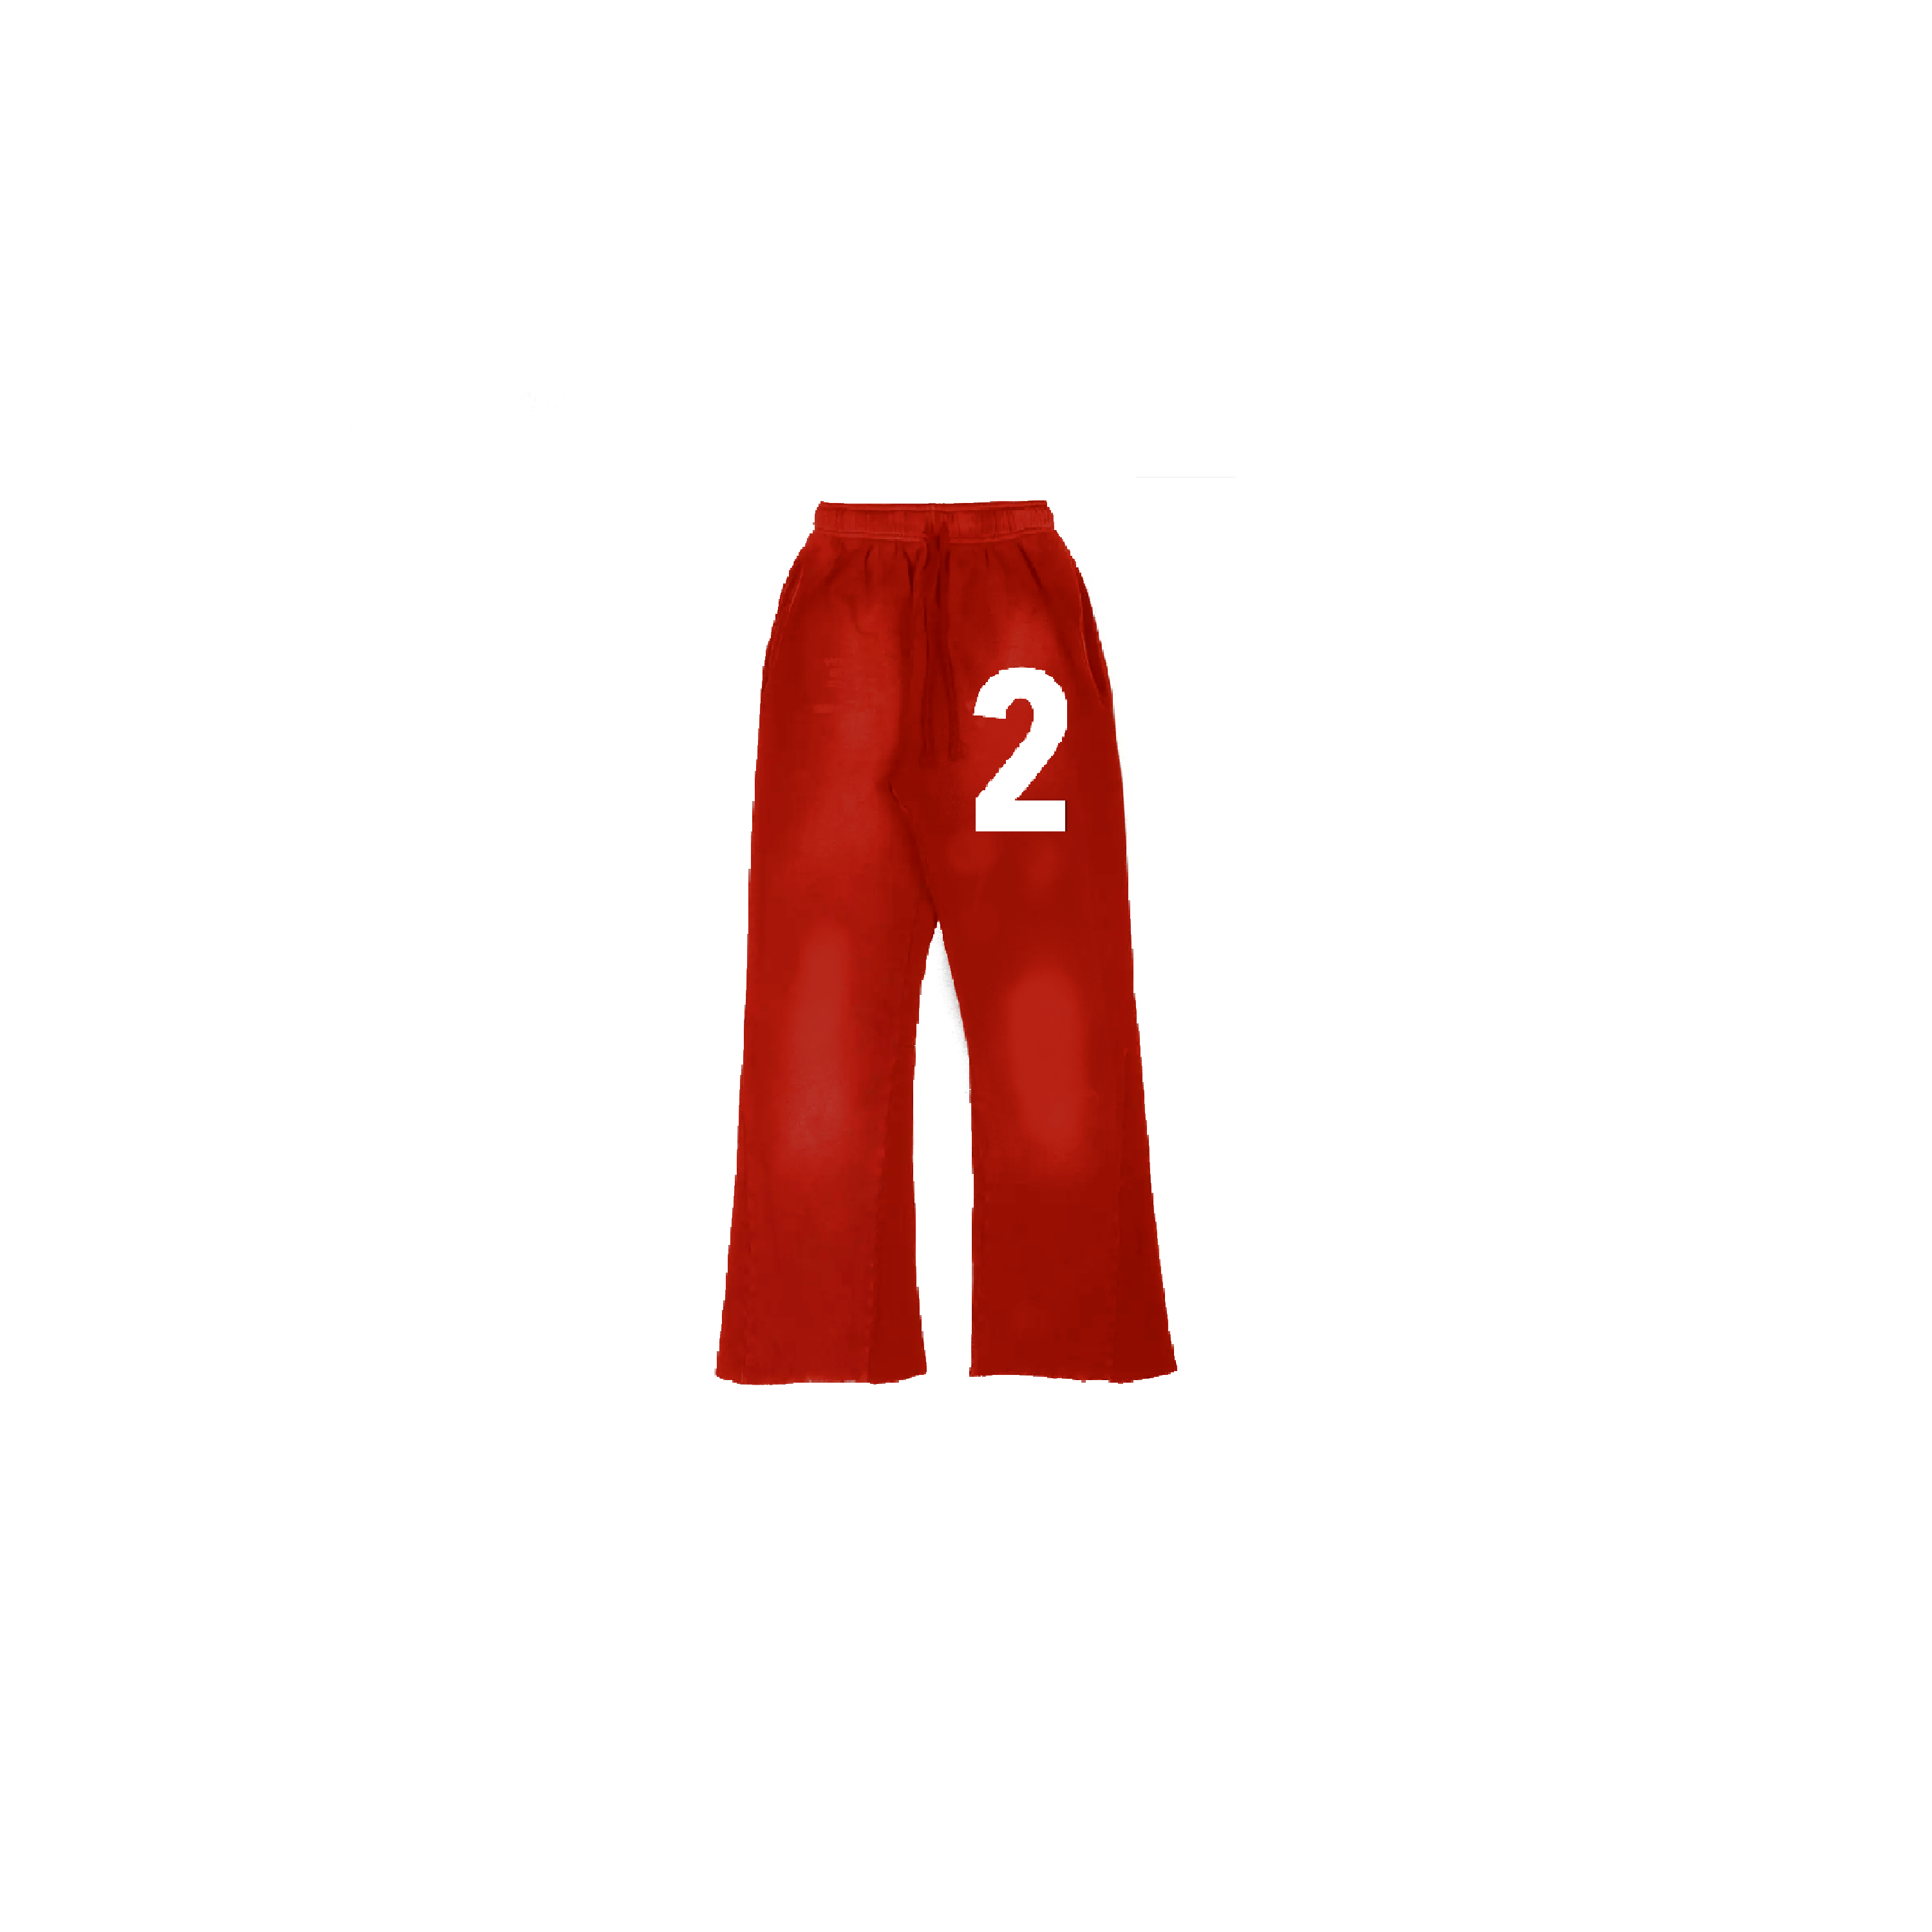 “2” Flares